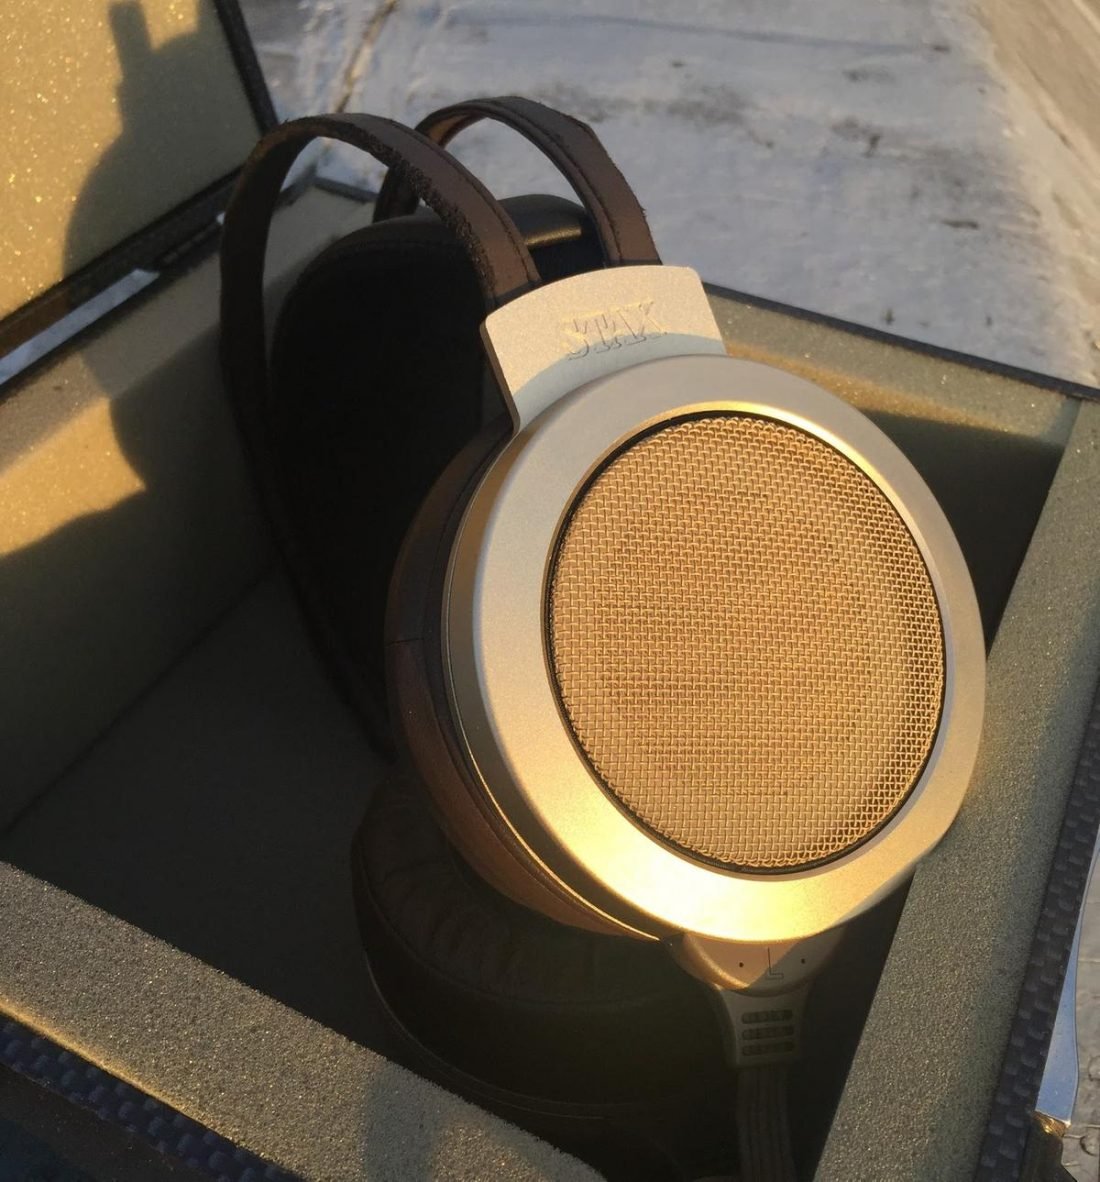 The SR-007's precisely-machined metal earcups catch the light of the setting sun